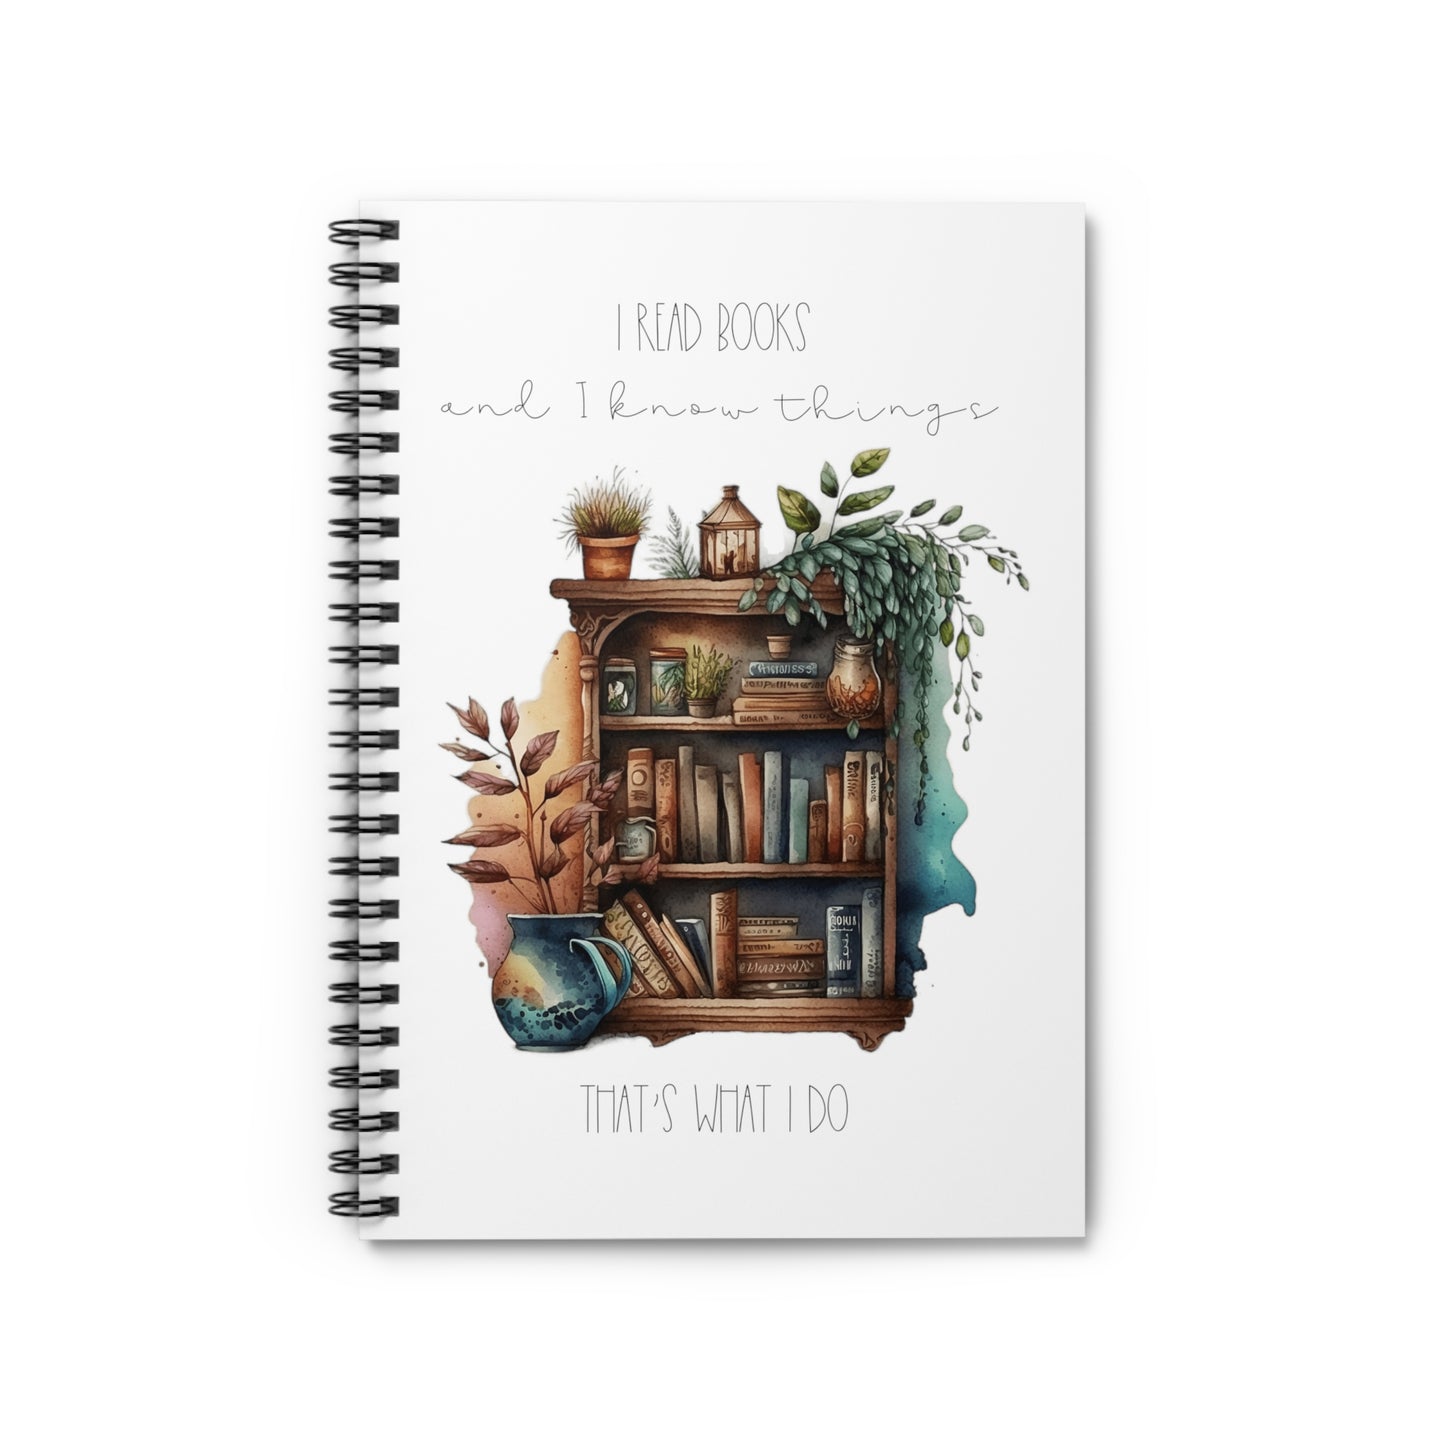 “I read books and I know things. That’s what I do.” Spiral Notebook - Ruled Line